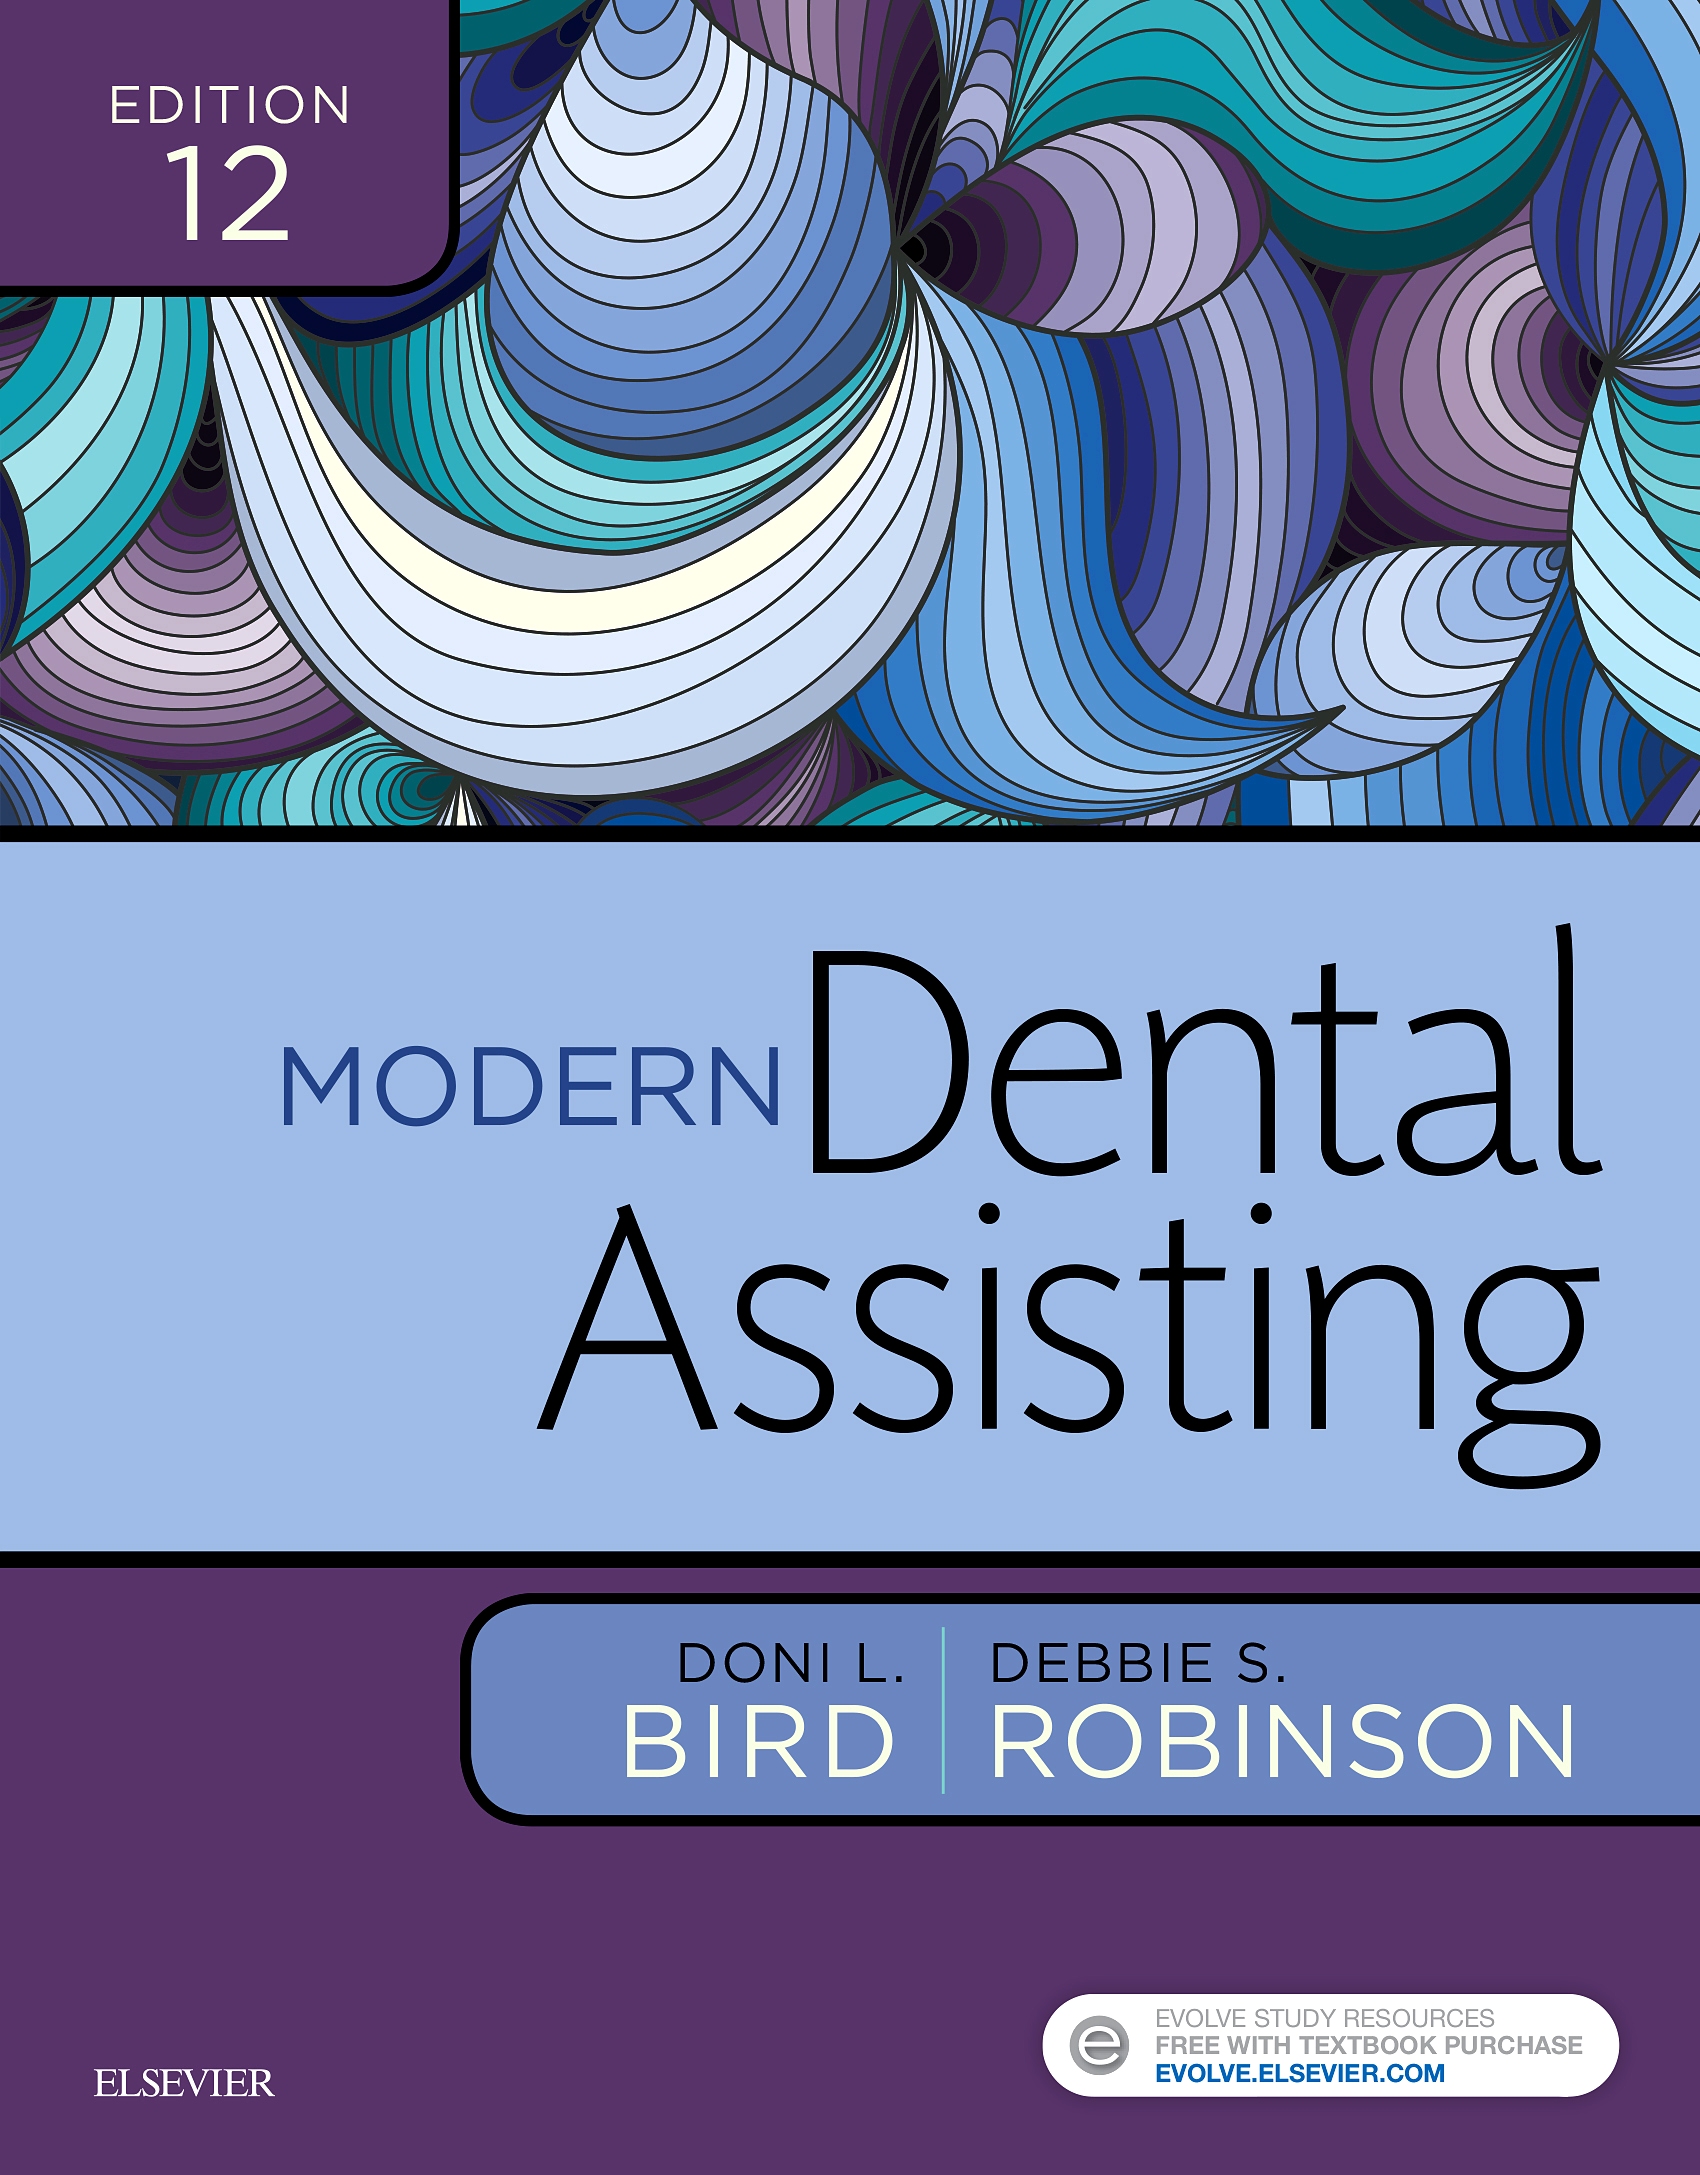 Evolve Resources for Modern Dental Assisting, 12th Edition